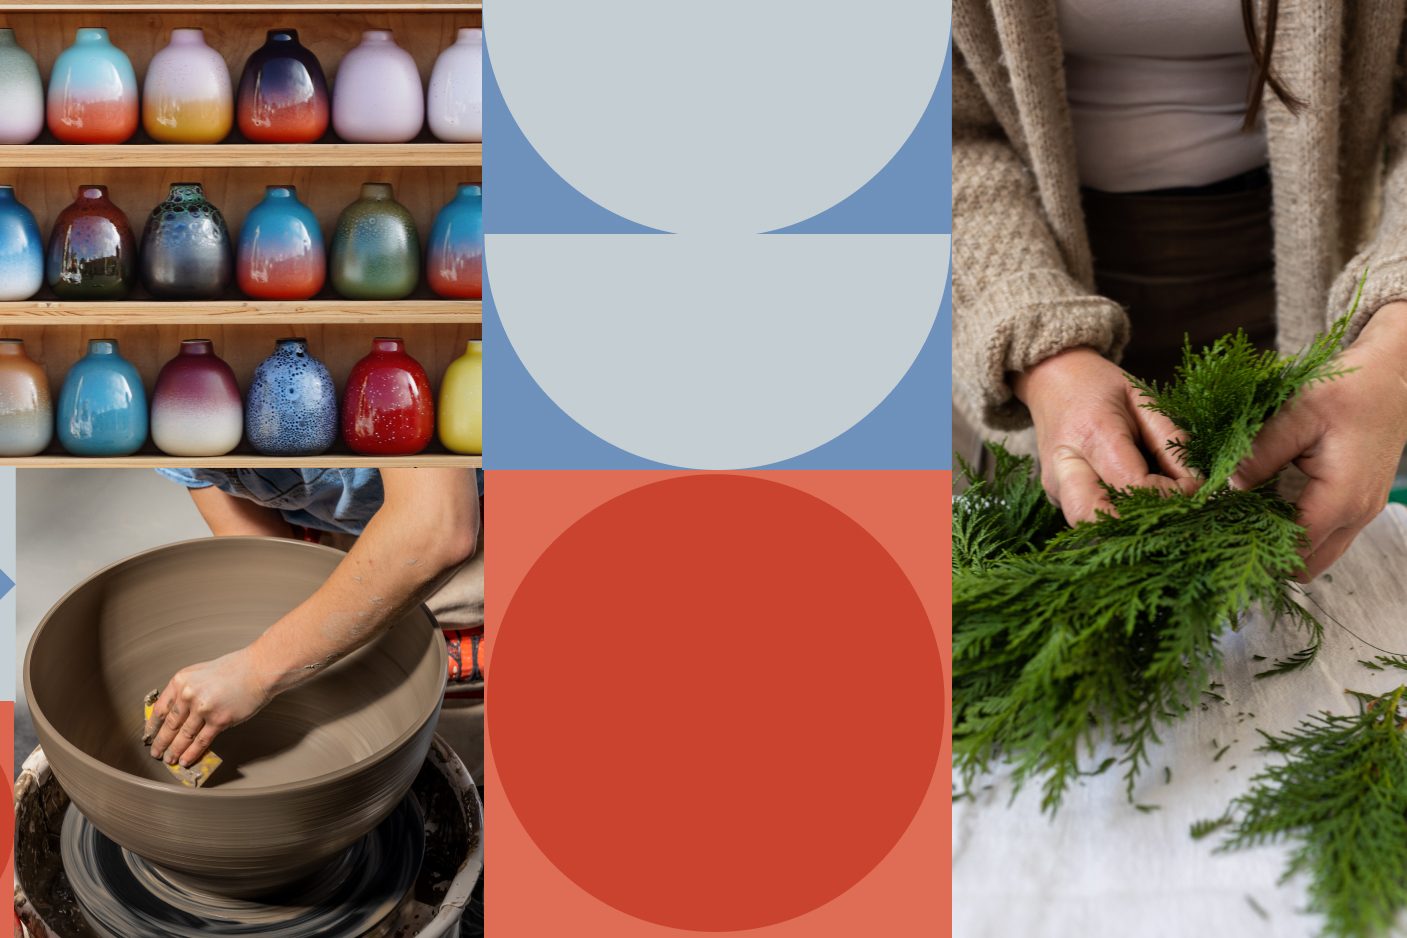 A visual that includes a person's hands making a clay pot, three shelves of colorful vases and graphic colored circles.